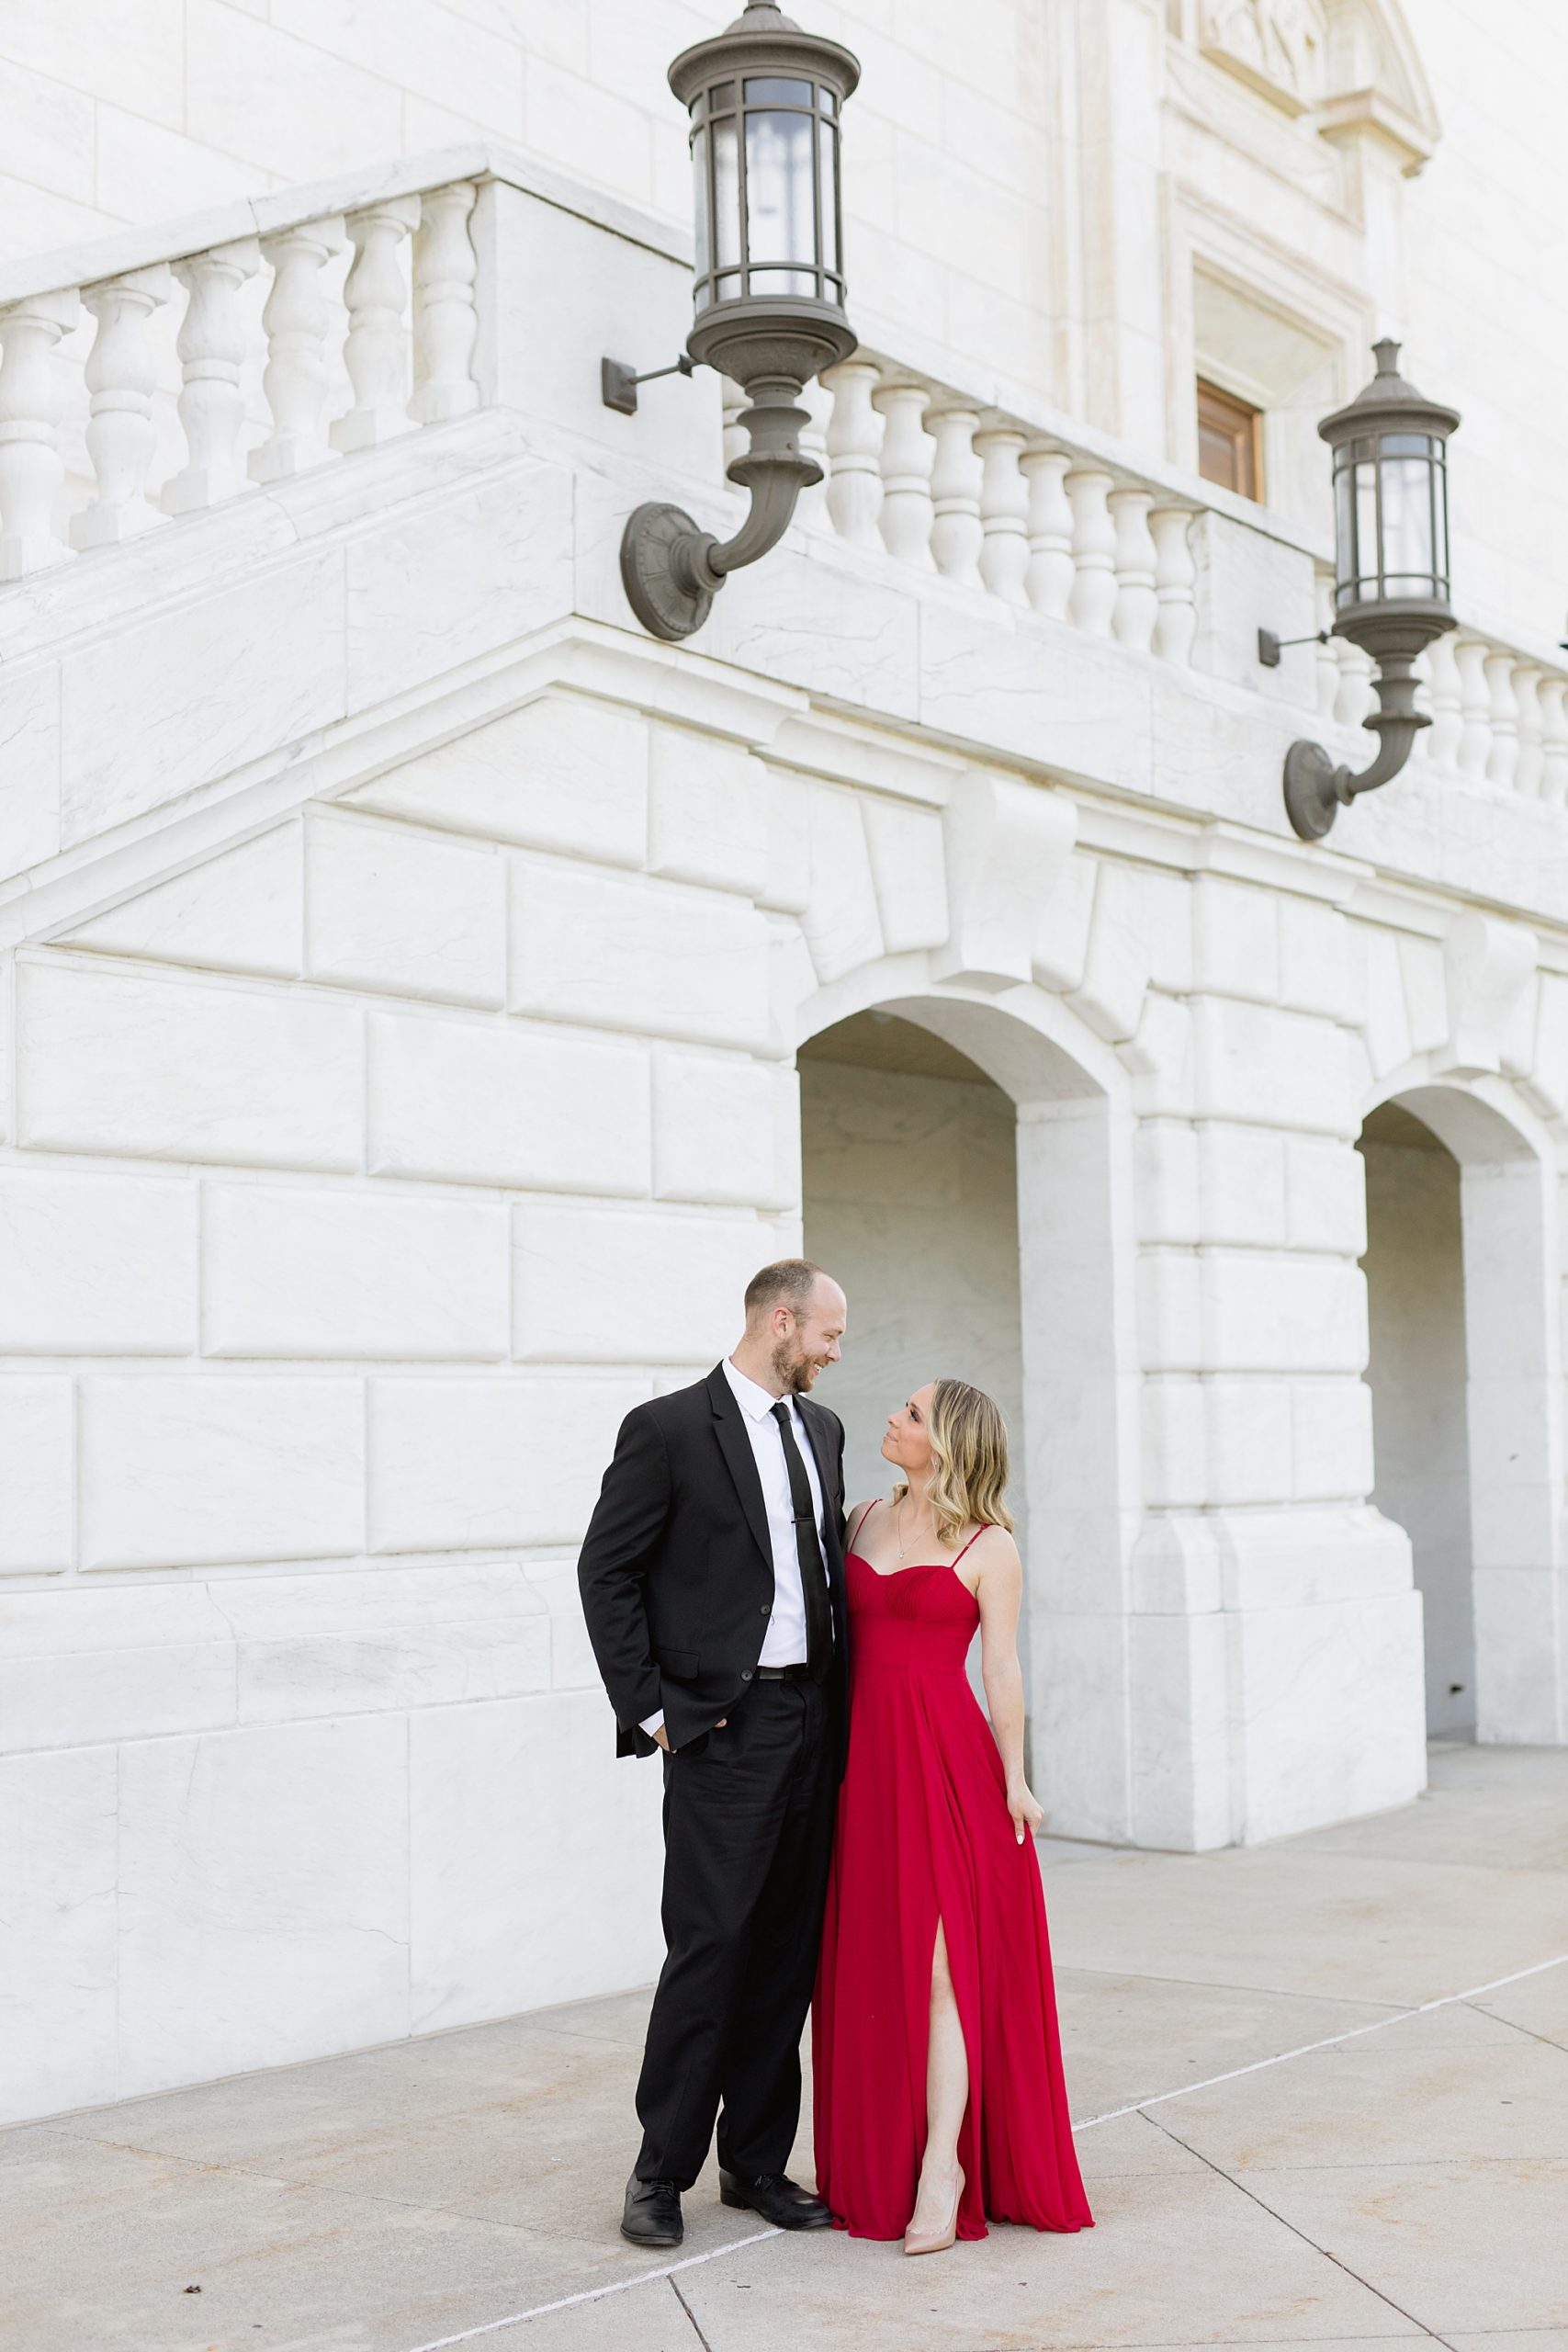 Classy engagement photos of woman in a red dress and man in a black suit